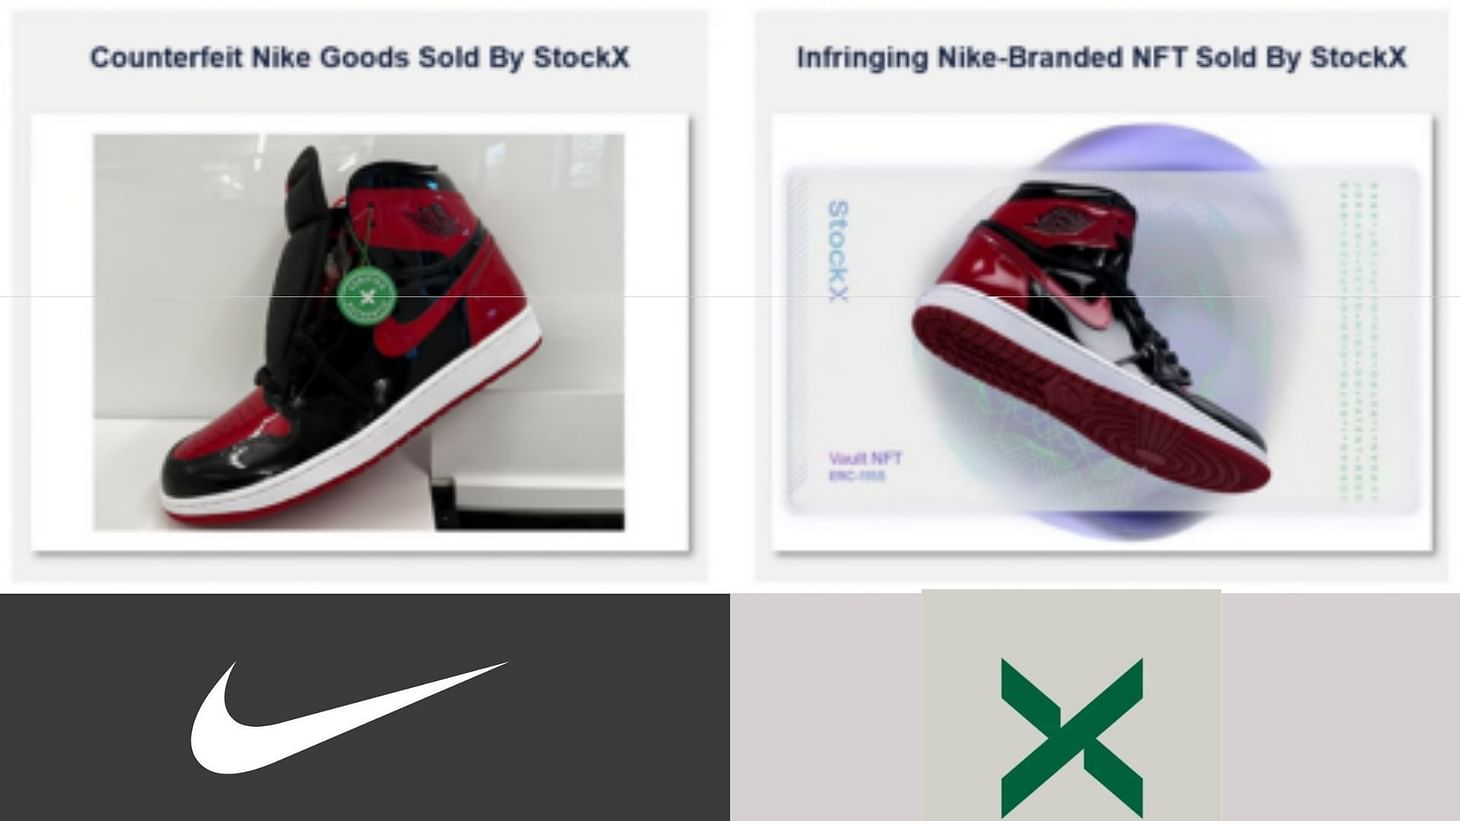 Nike X StockX lawsuit explained amid counterfeit sneakers drama